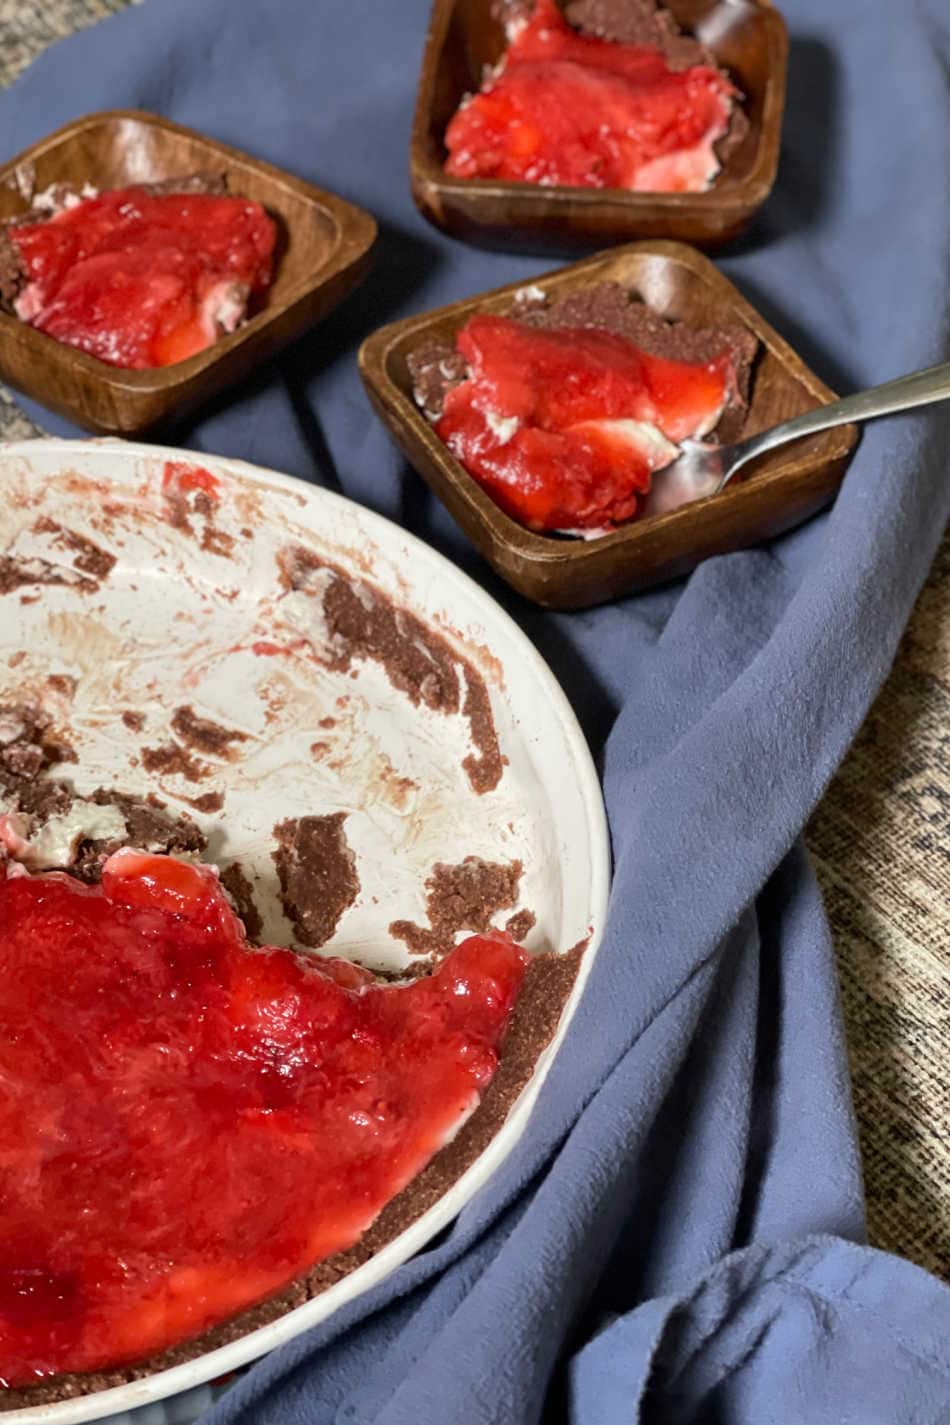 No Bake Valentine's Day Strawberry Cream Pie with Chocolate Pie Crust | Growing Up Herbal | This no bake Valentine's Day pie is not only delicious but healthy and the perfect sweet treat to show someone your care. Get the recipe!